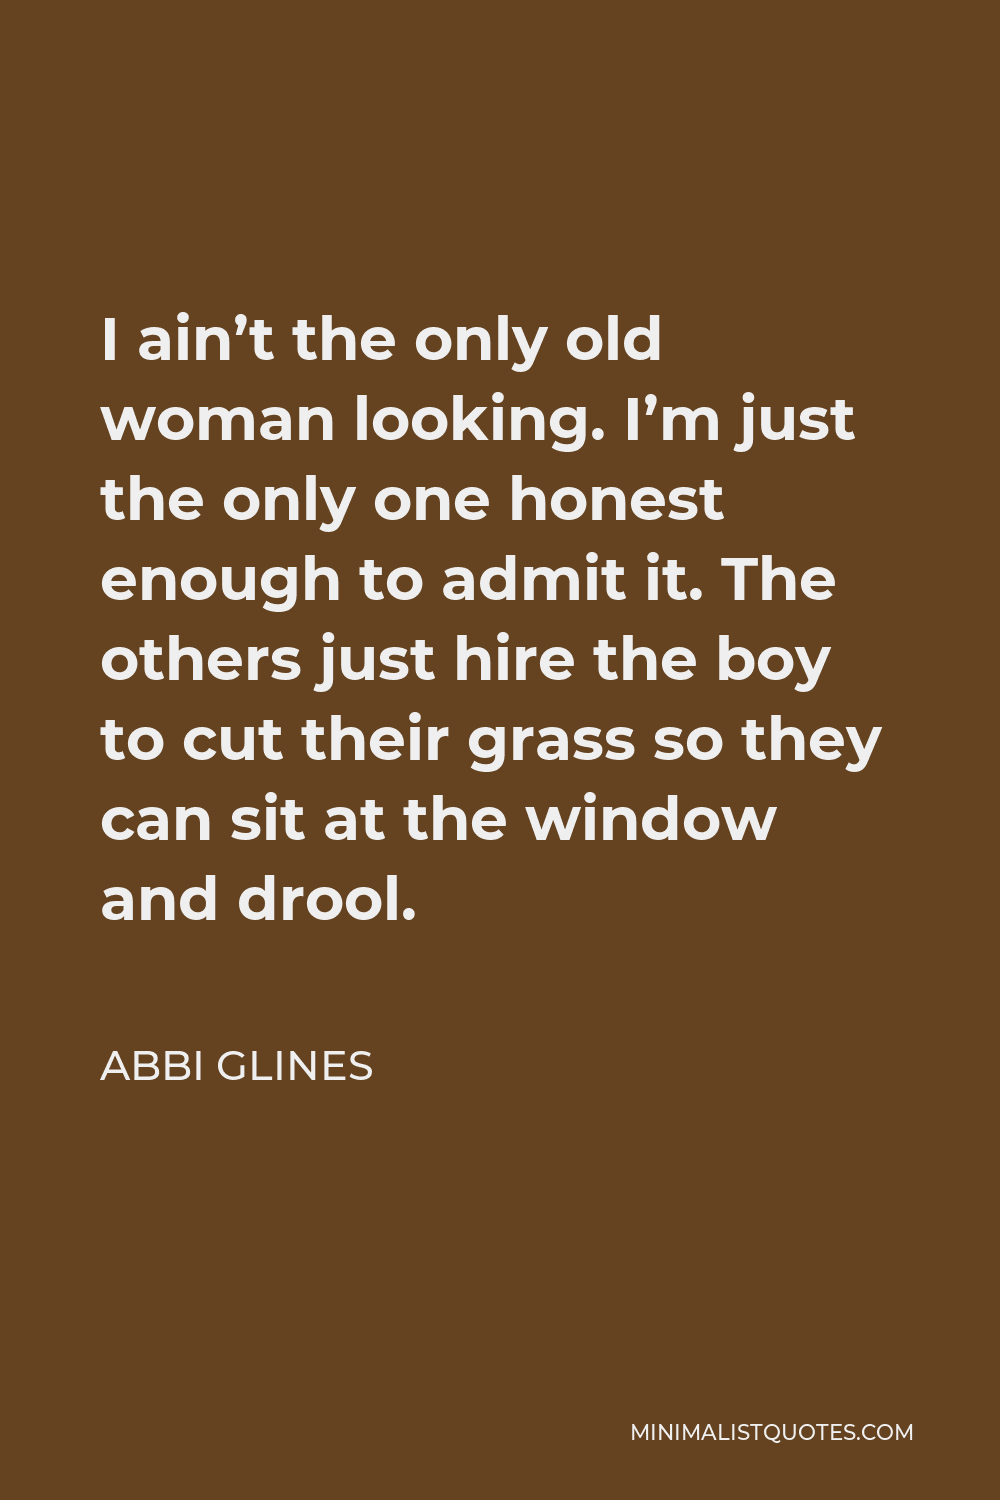 Abbi Glines Quote - I ain’t the only old woman looking. I’m just the only one honest enough to admit it. The others just hire the boy to cut their grass so they can sit at the window and drool.